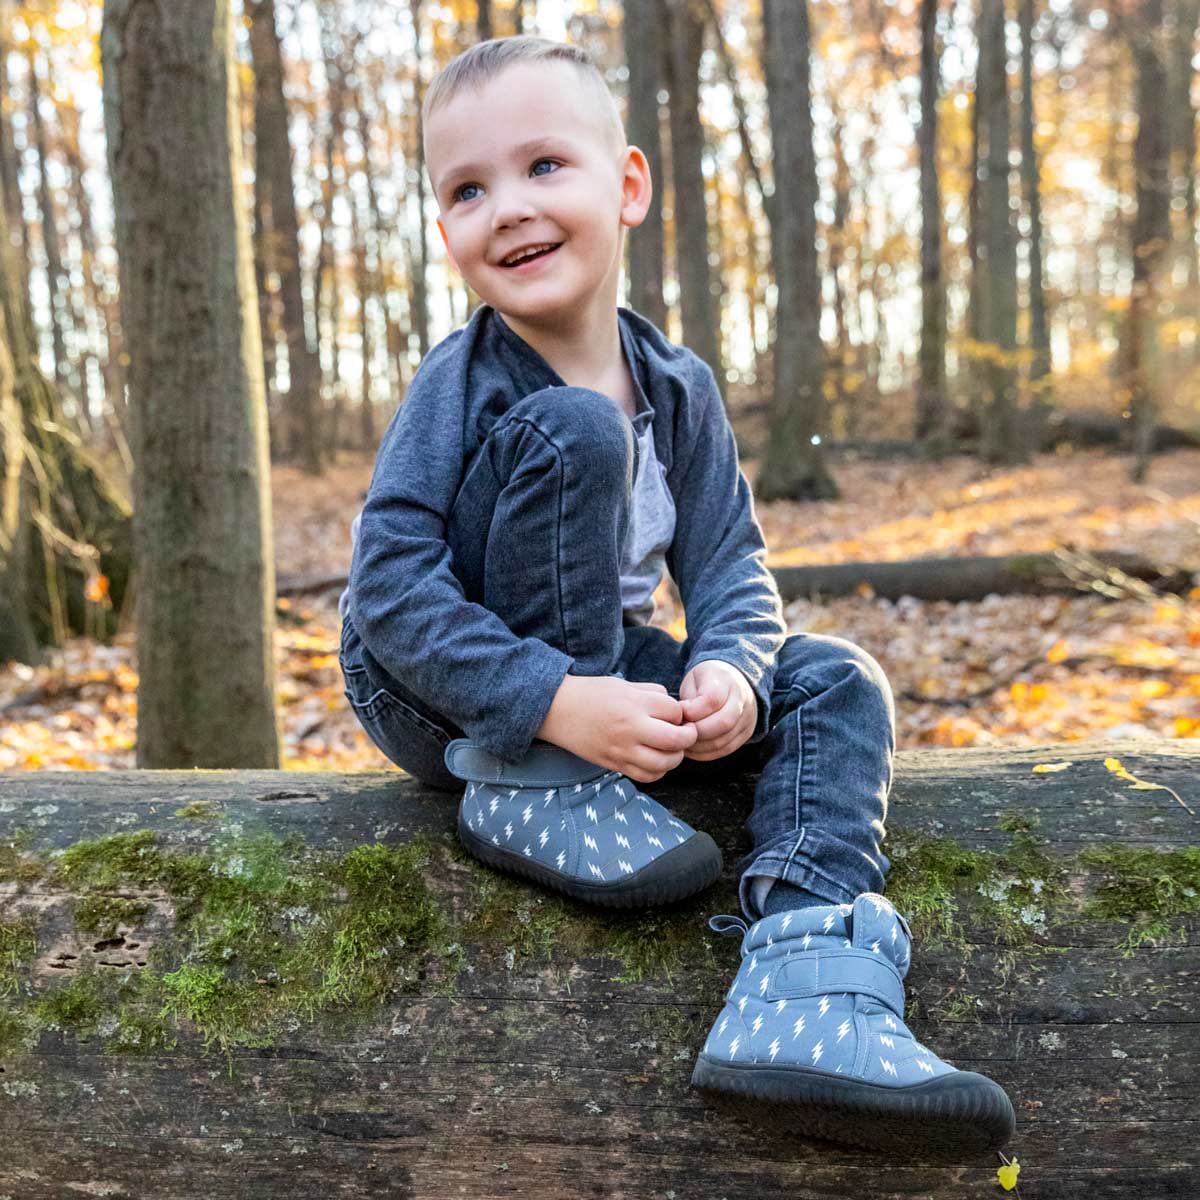 Jan & Jul Toasty-Dry Waterproof Booties for Spring Fall Winter for Toddler Kids 